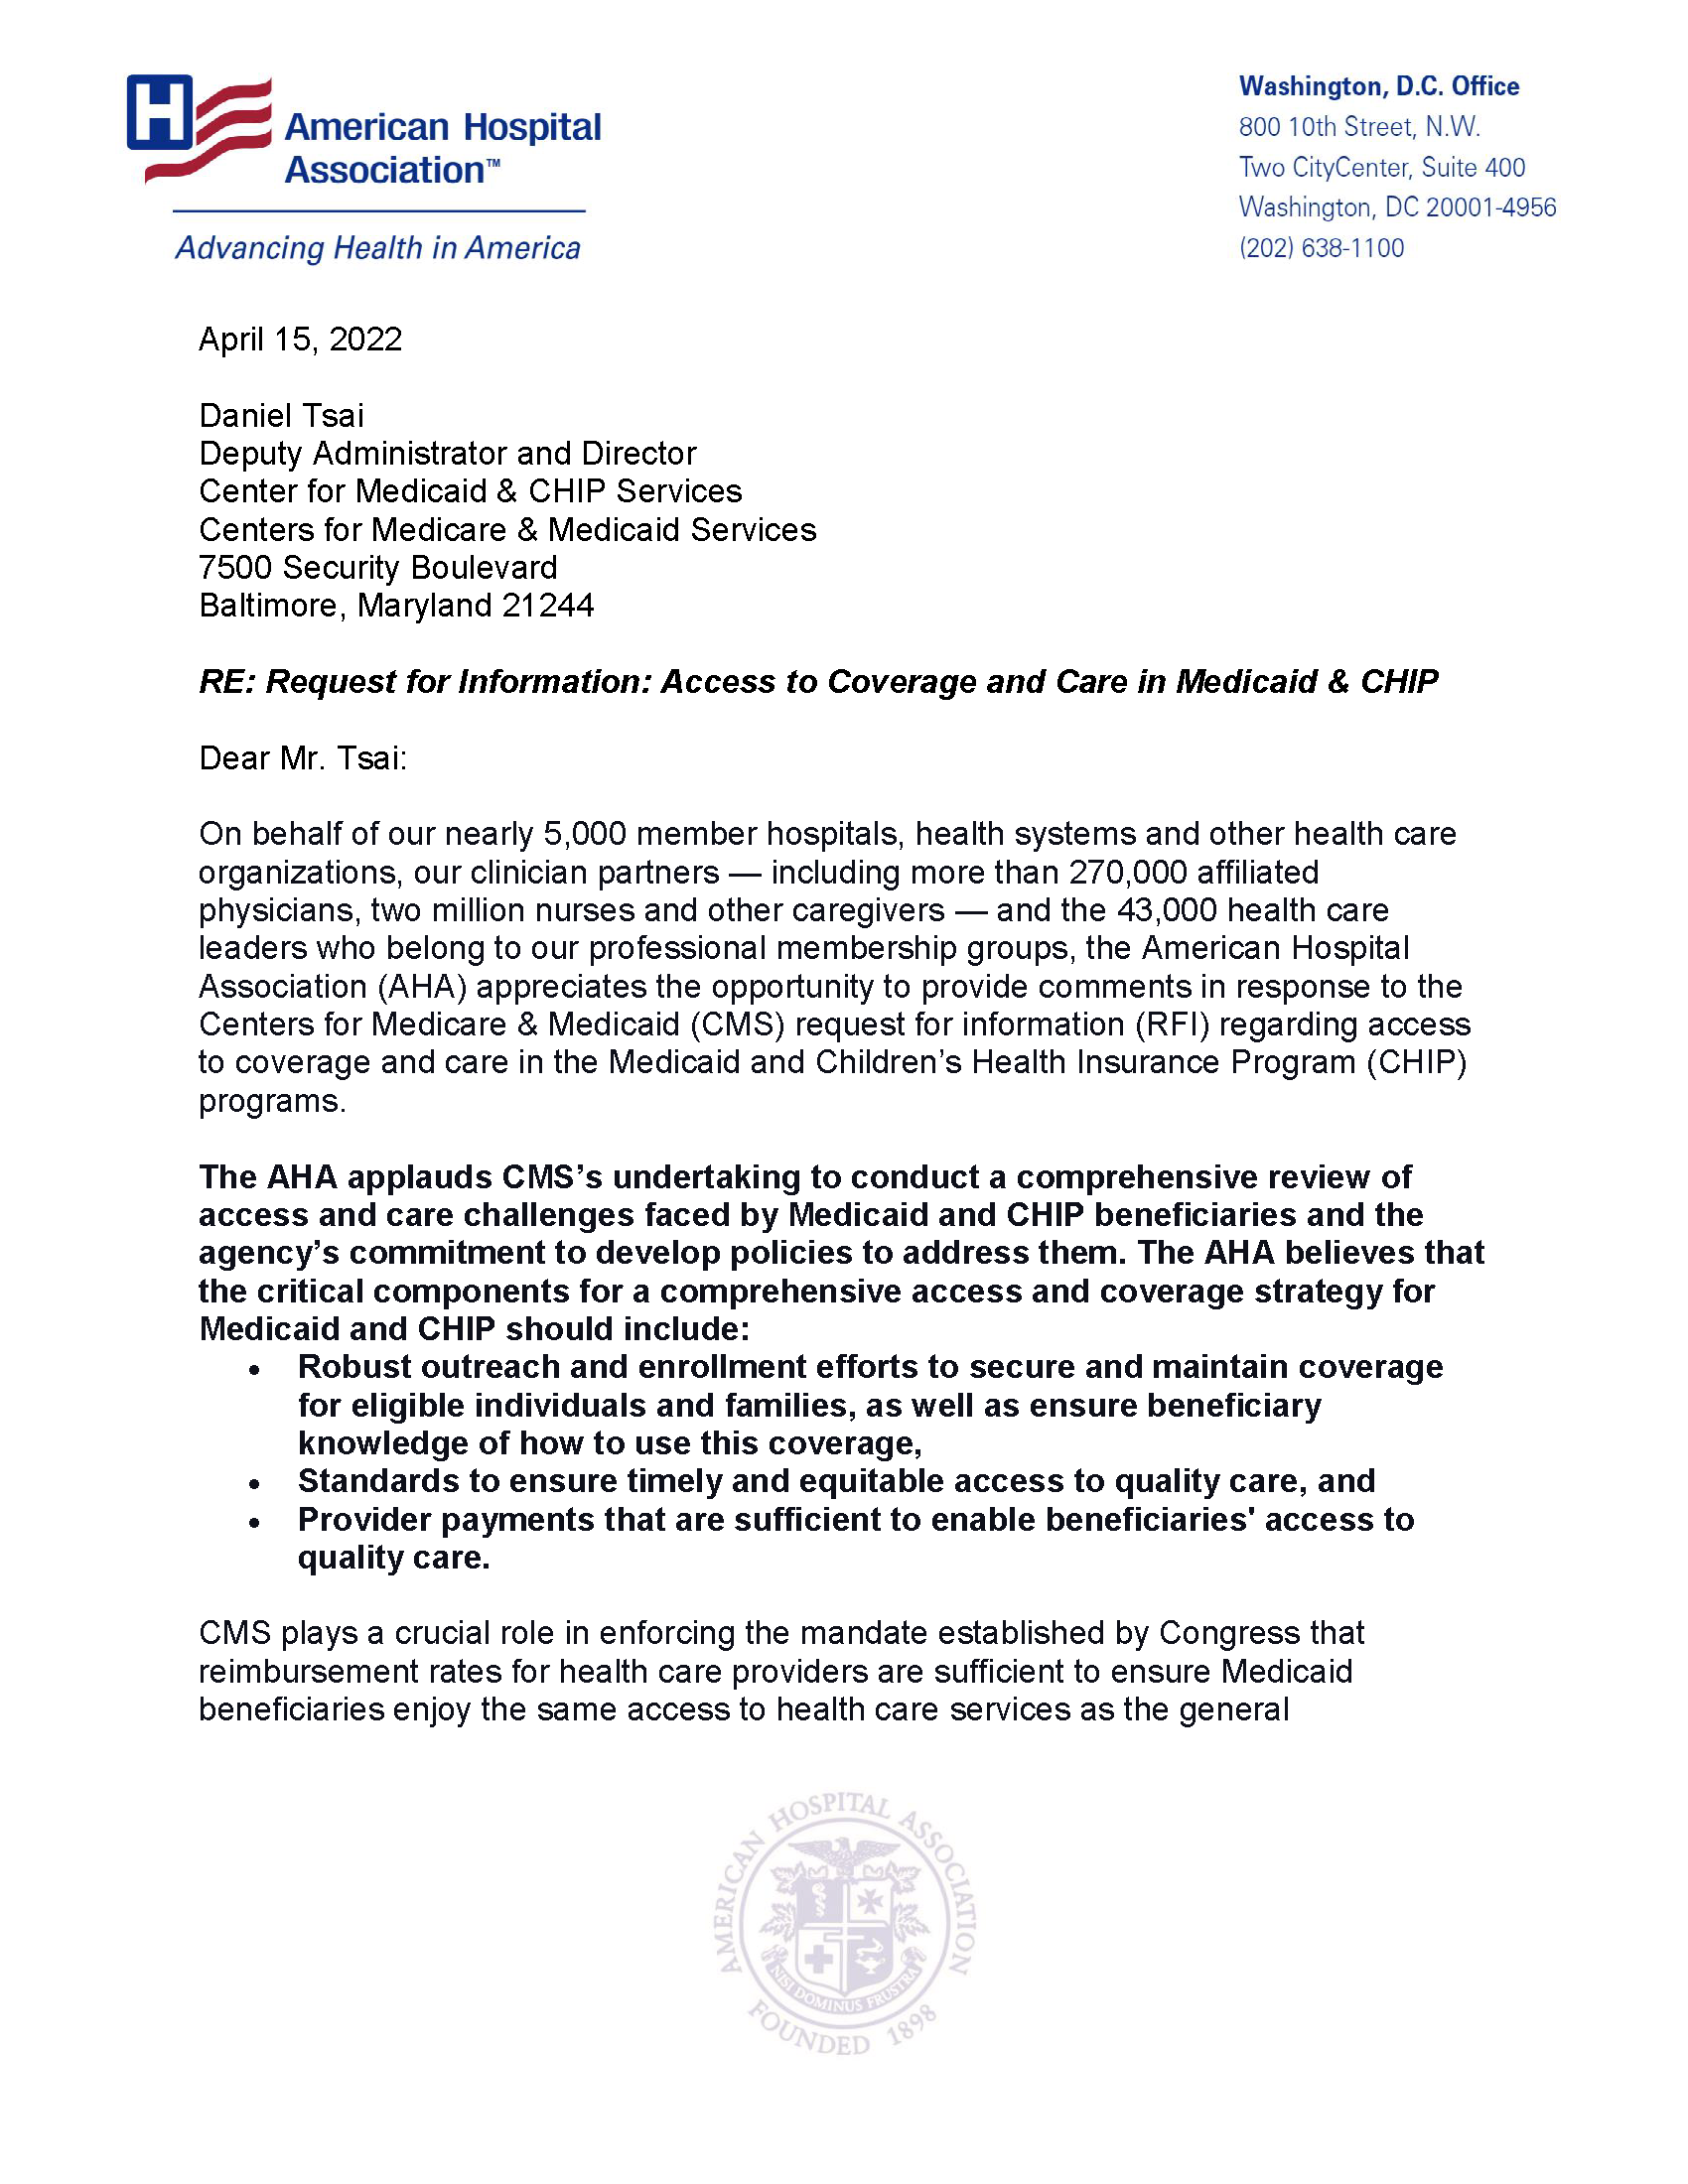 Letter to CMS in Response to RFI Access to Coverage and Care in Medicaid & CHIP AHA